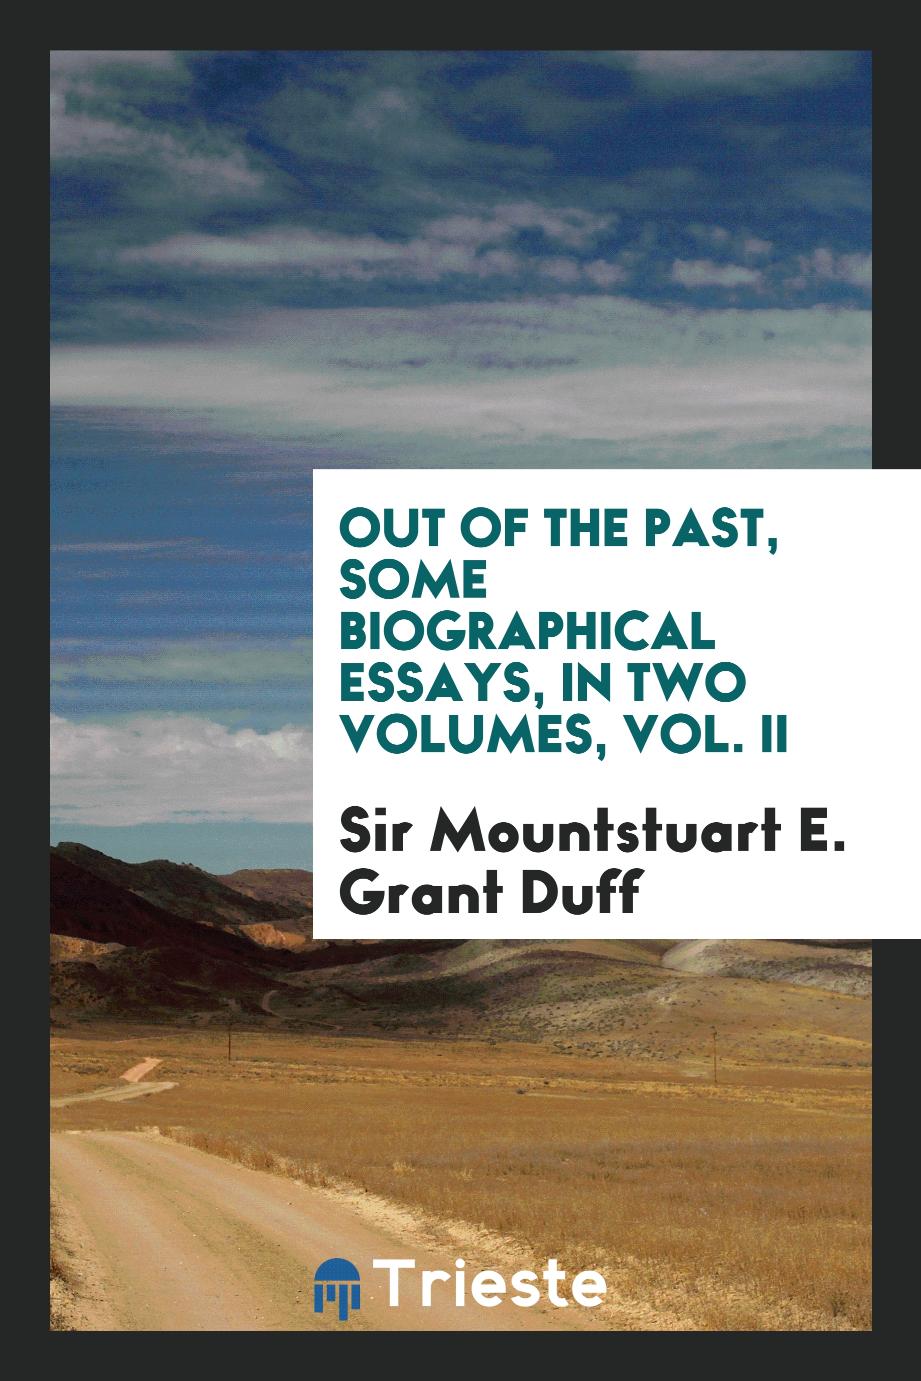 Out of the past, some biographical essays, in two volumes, Vol. II